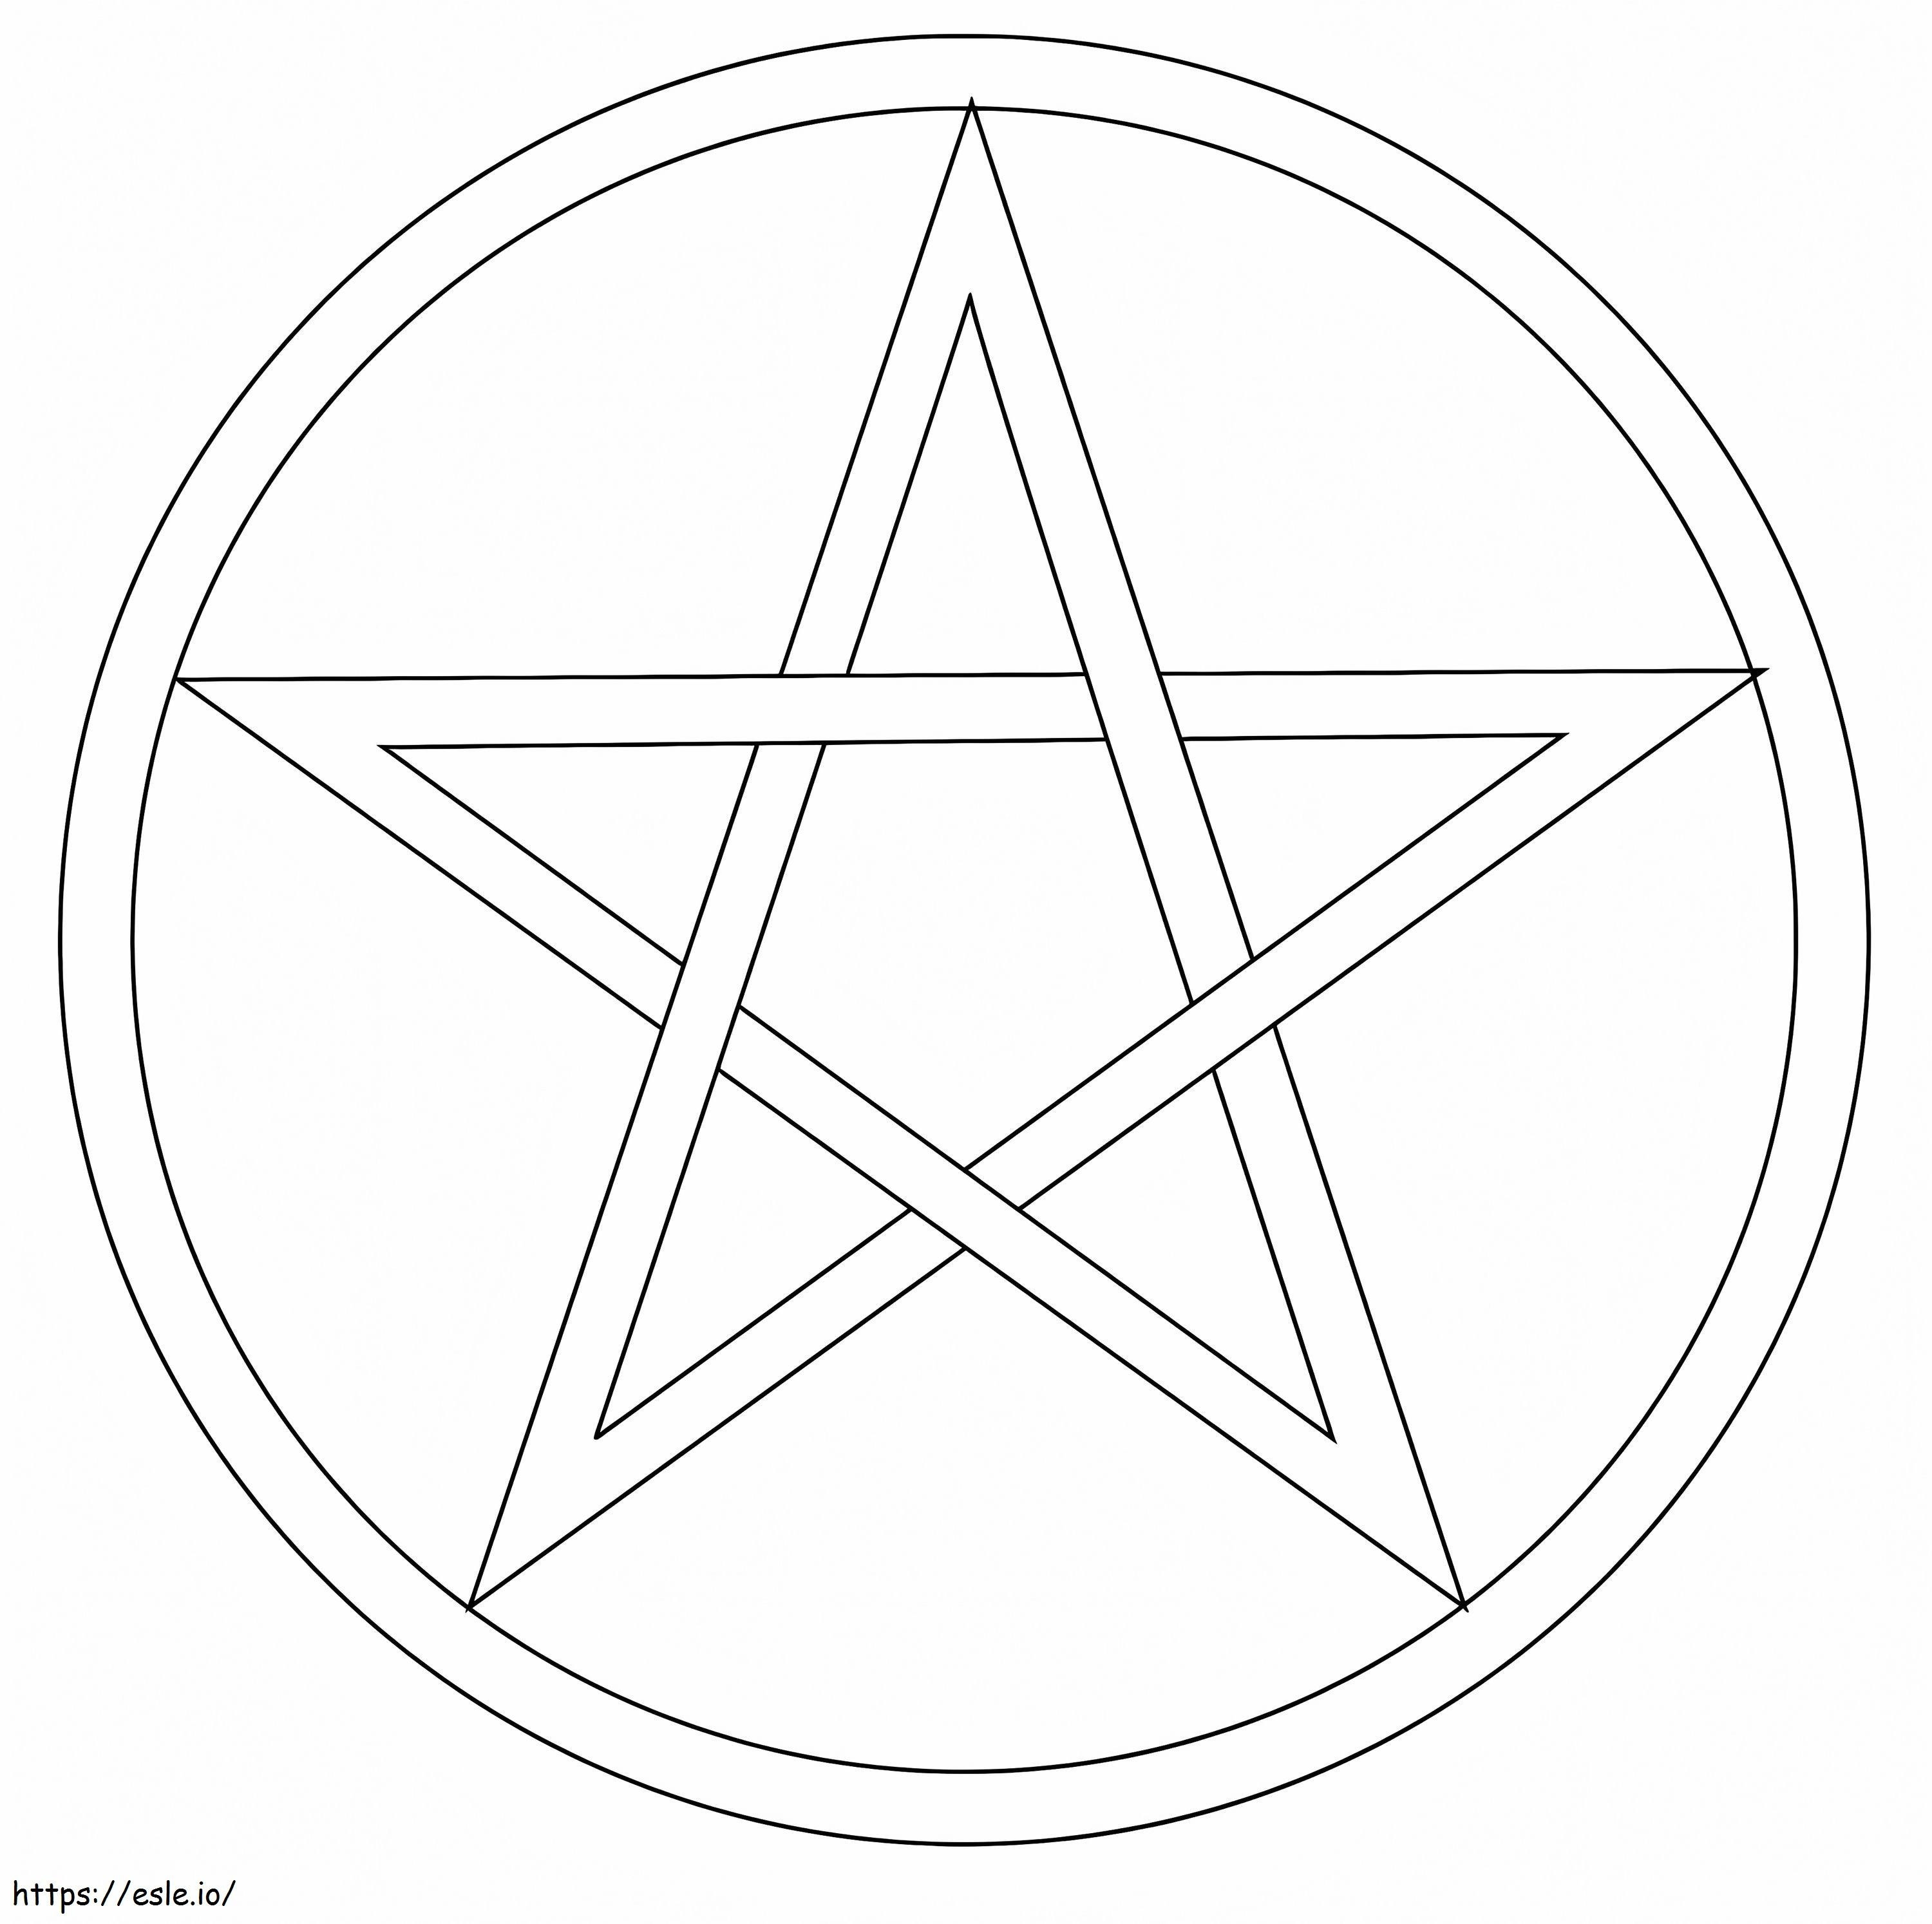 Easy Wiccan coloring page